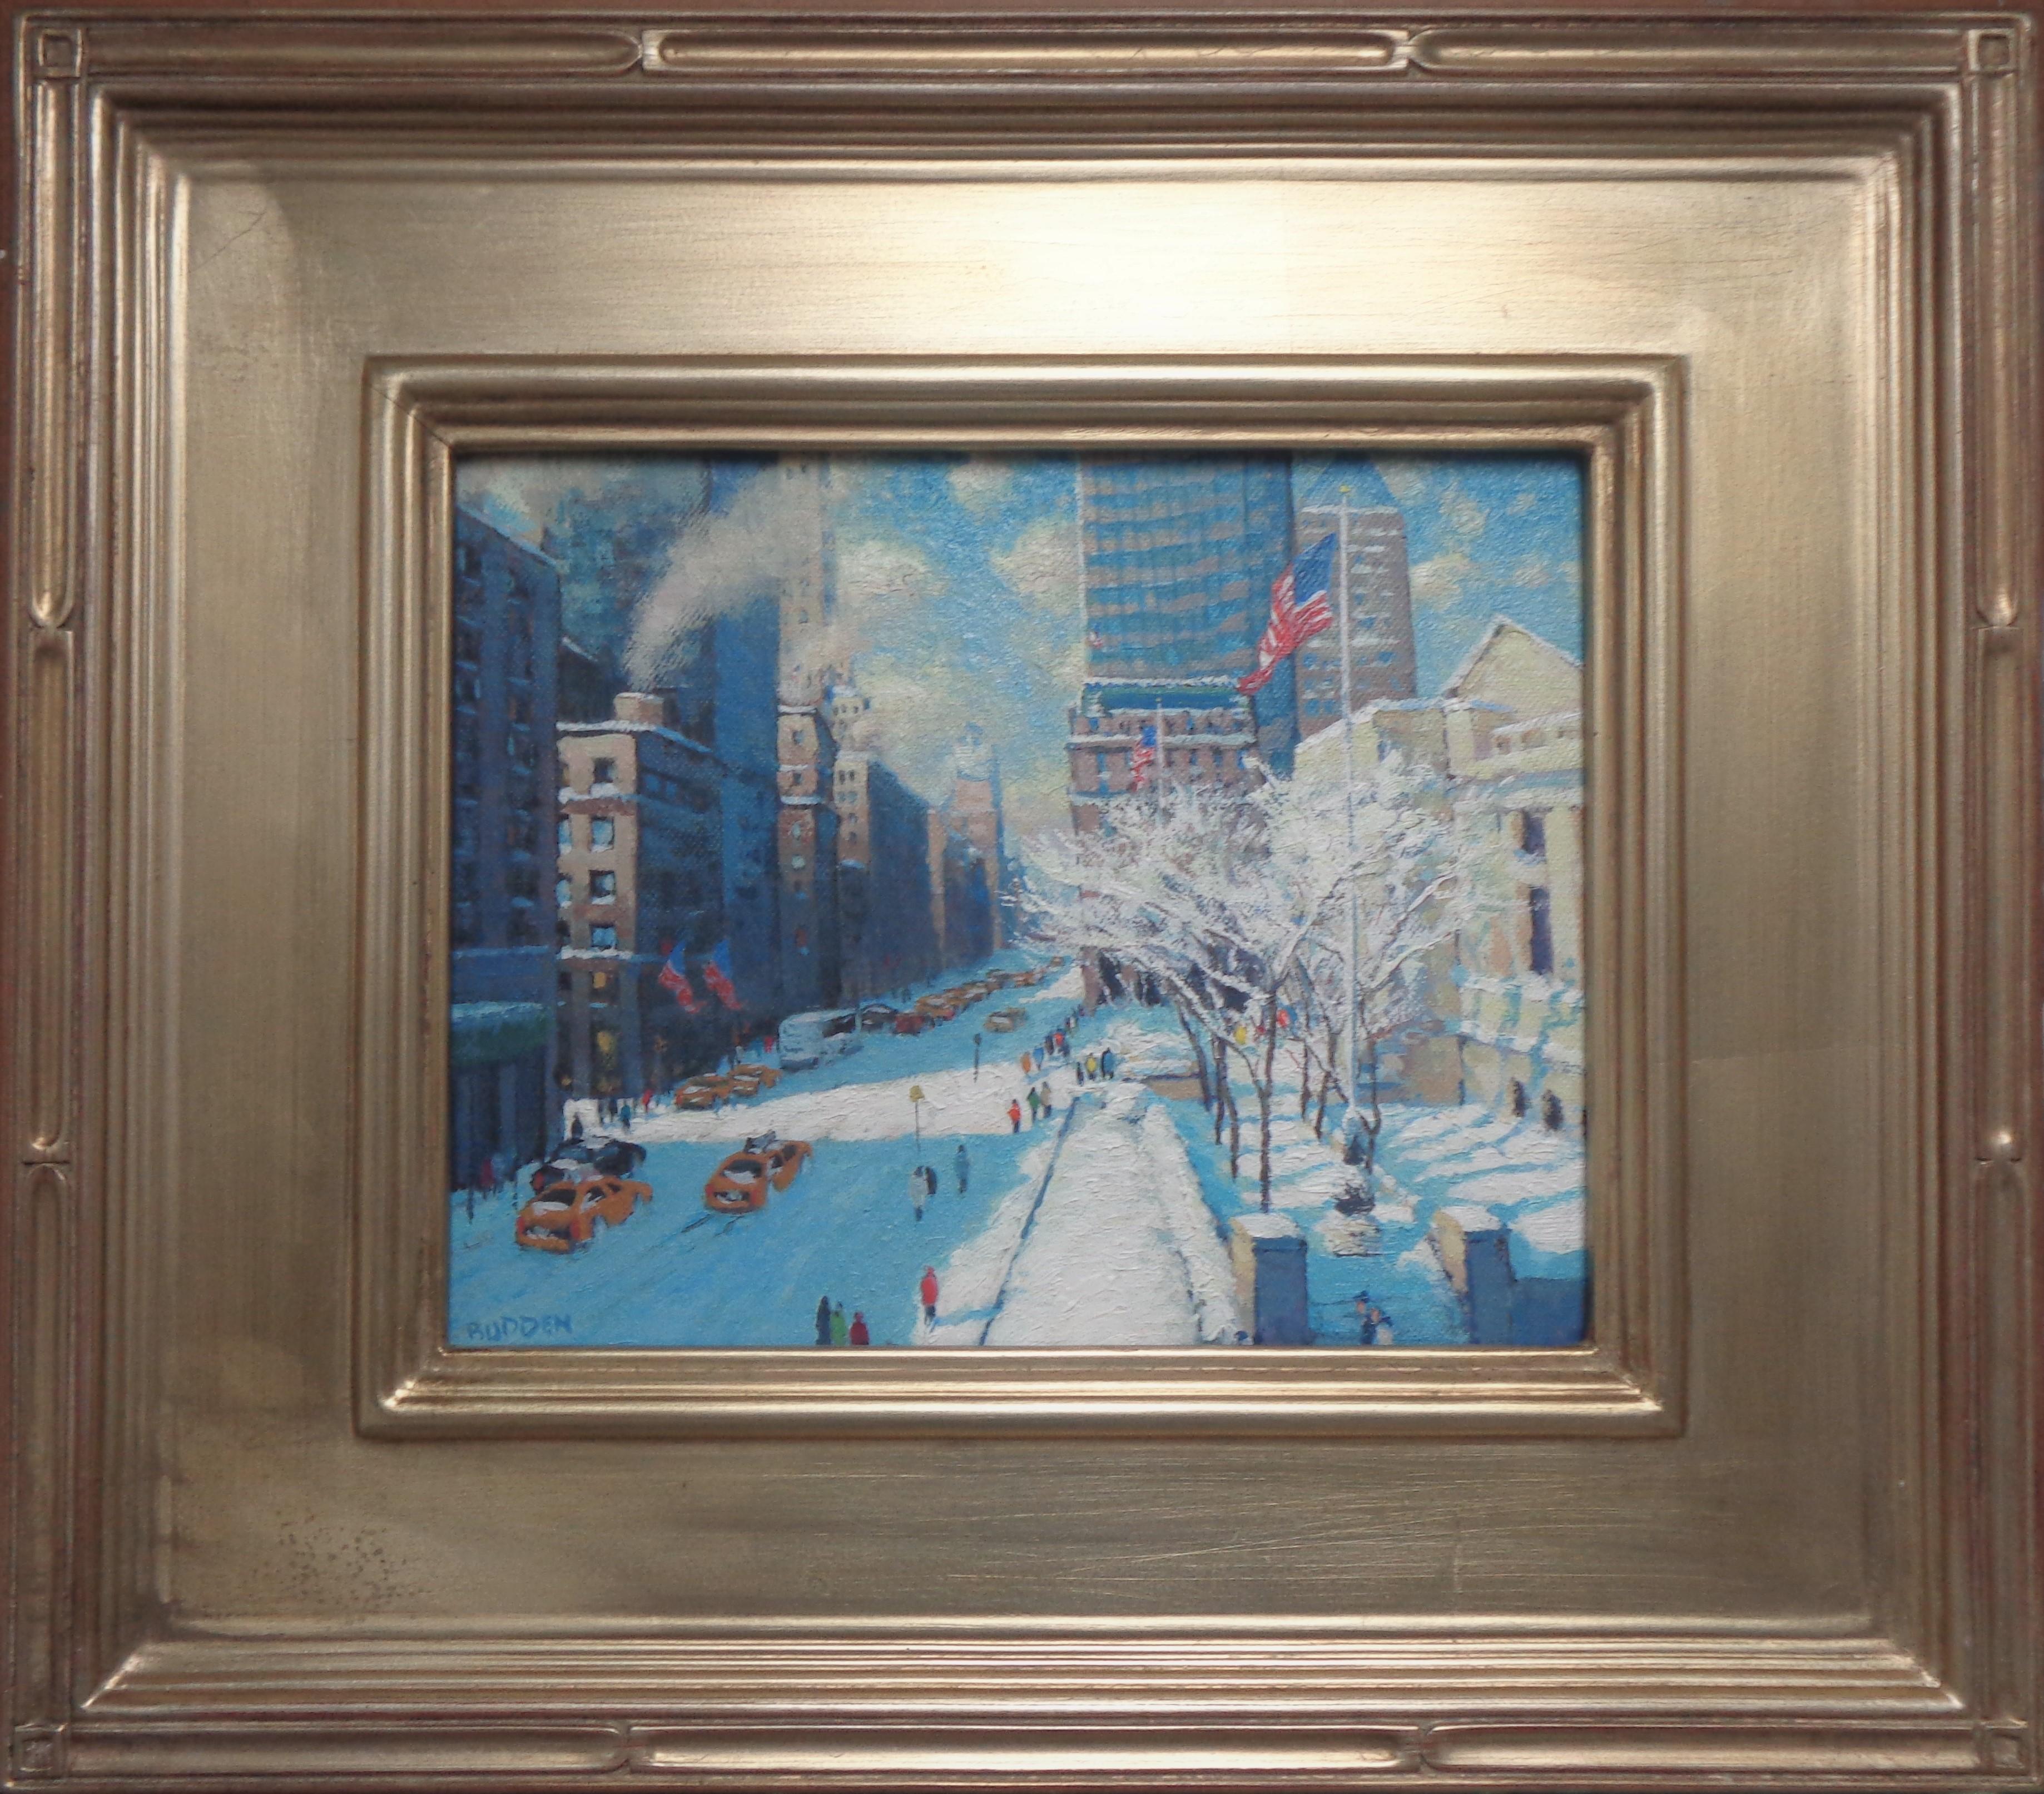 Winter Afternoon Public Library is an oil painting  on canvas panel by award winning contemporary artist Michael Budden. The Public Library 5th Avenue is obviously a favorite spot to hit while visiting NYC and an iconic image for sure.  I enjoy